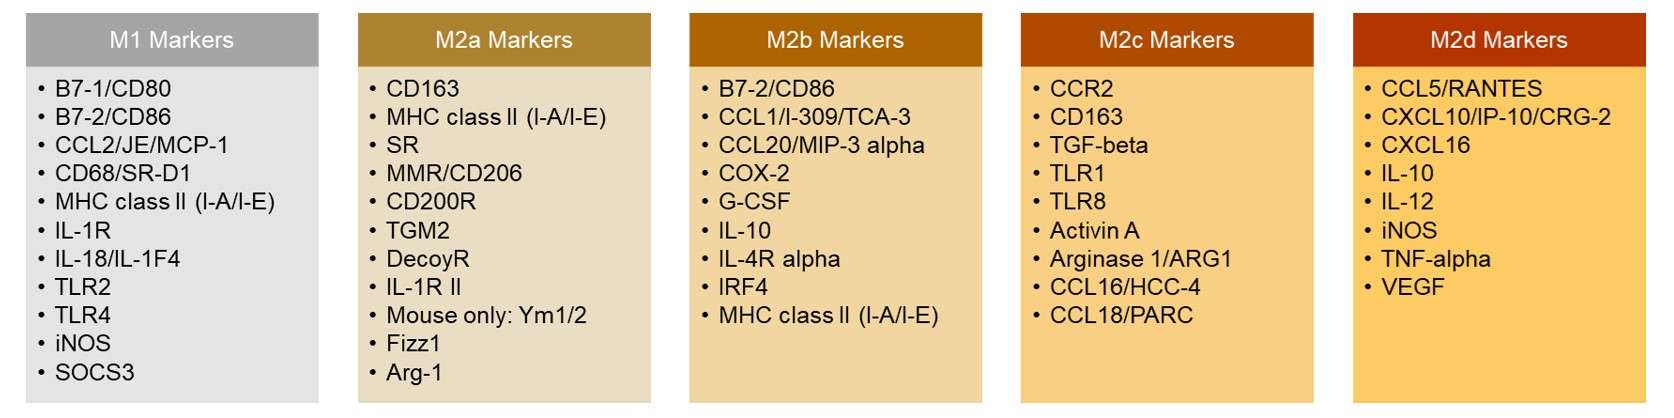 Different phenotypes of macrophages and their markers.